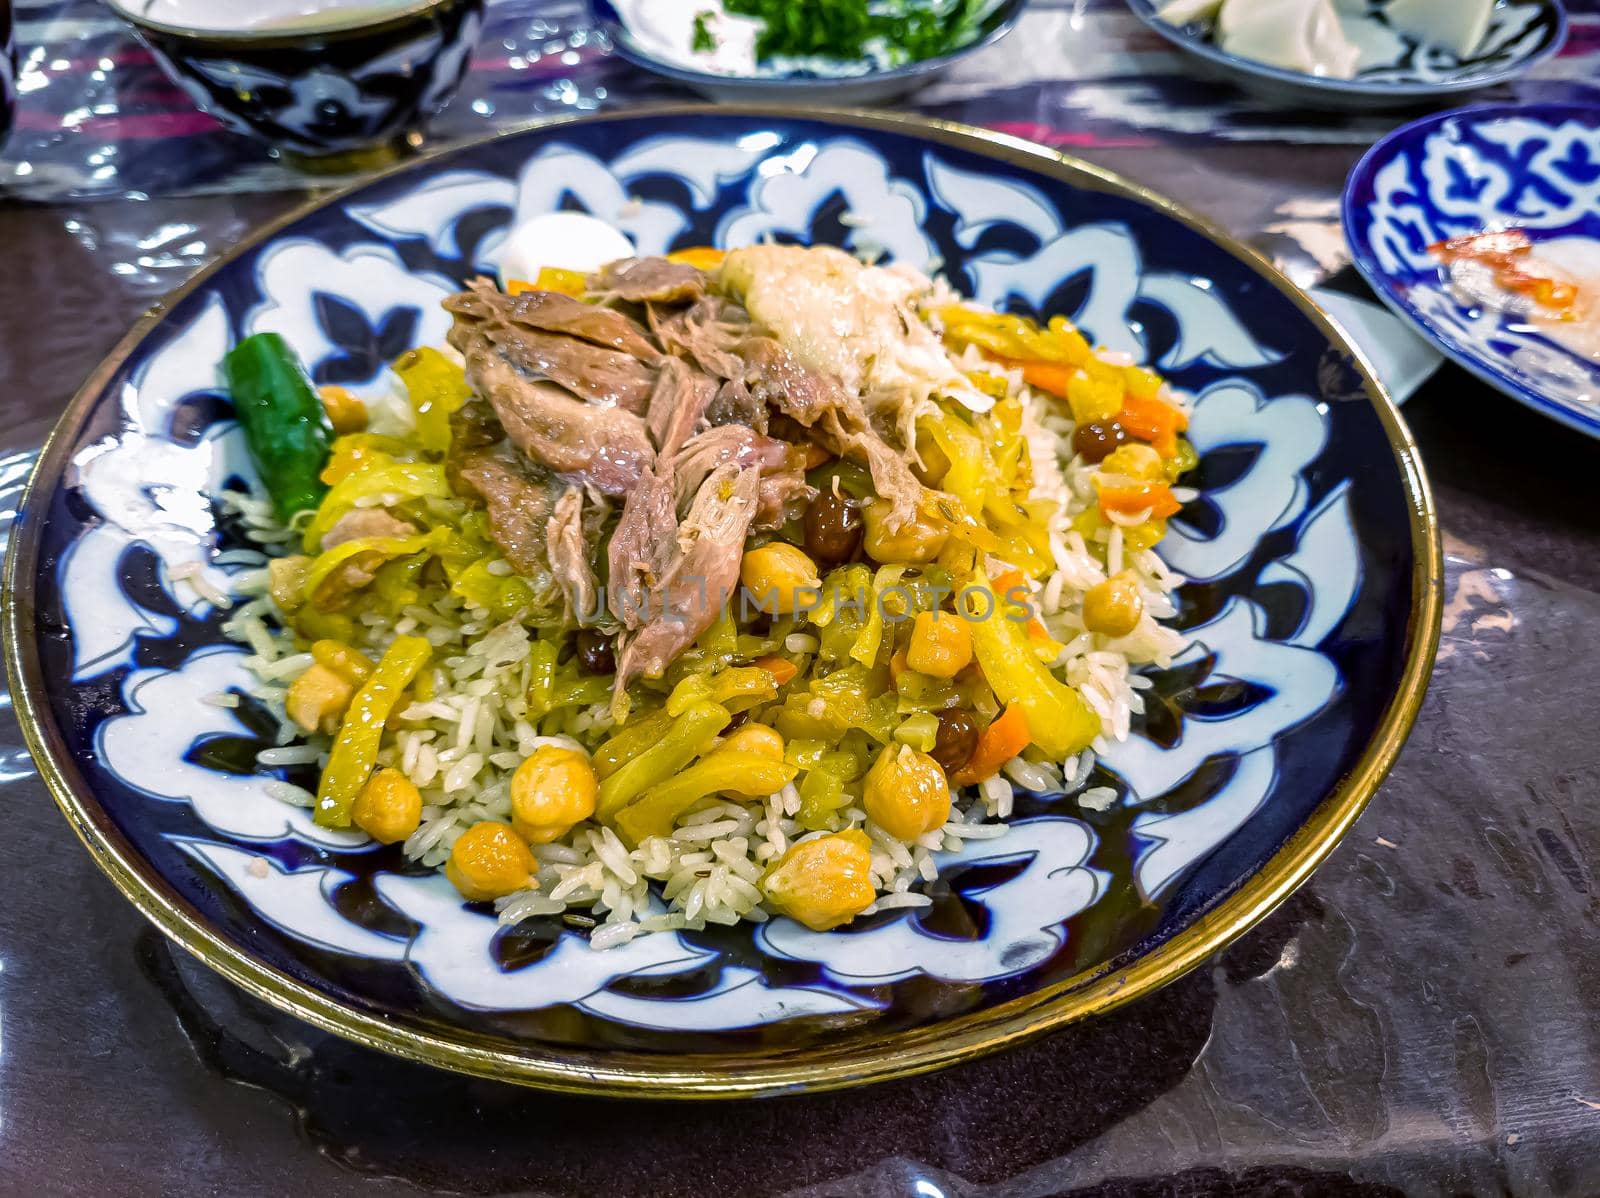 Traditional Uzbek pilaf from Samarkand. Meat, vegetables and rice are not mixed and laid out in layers